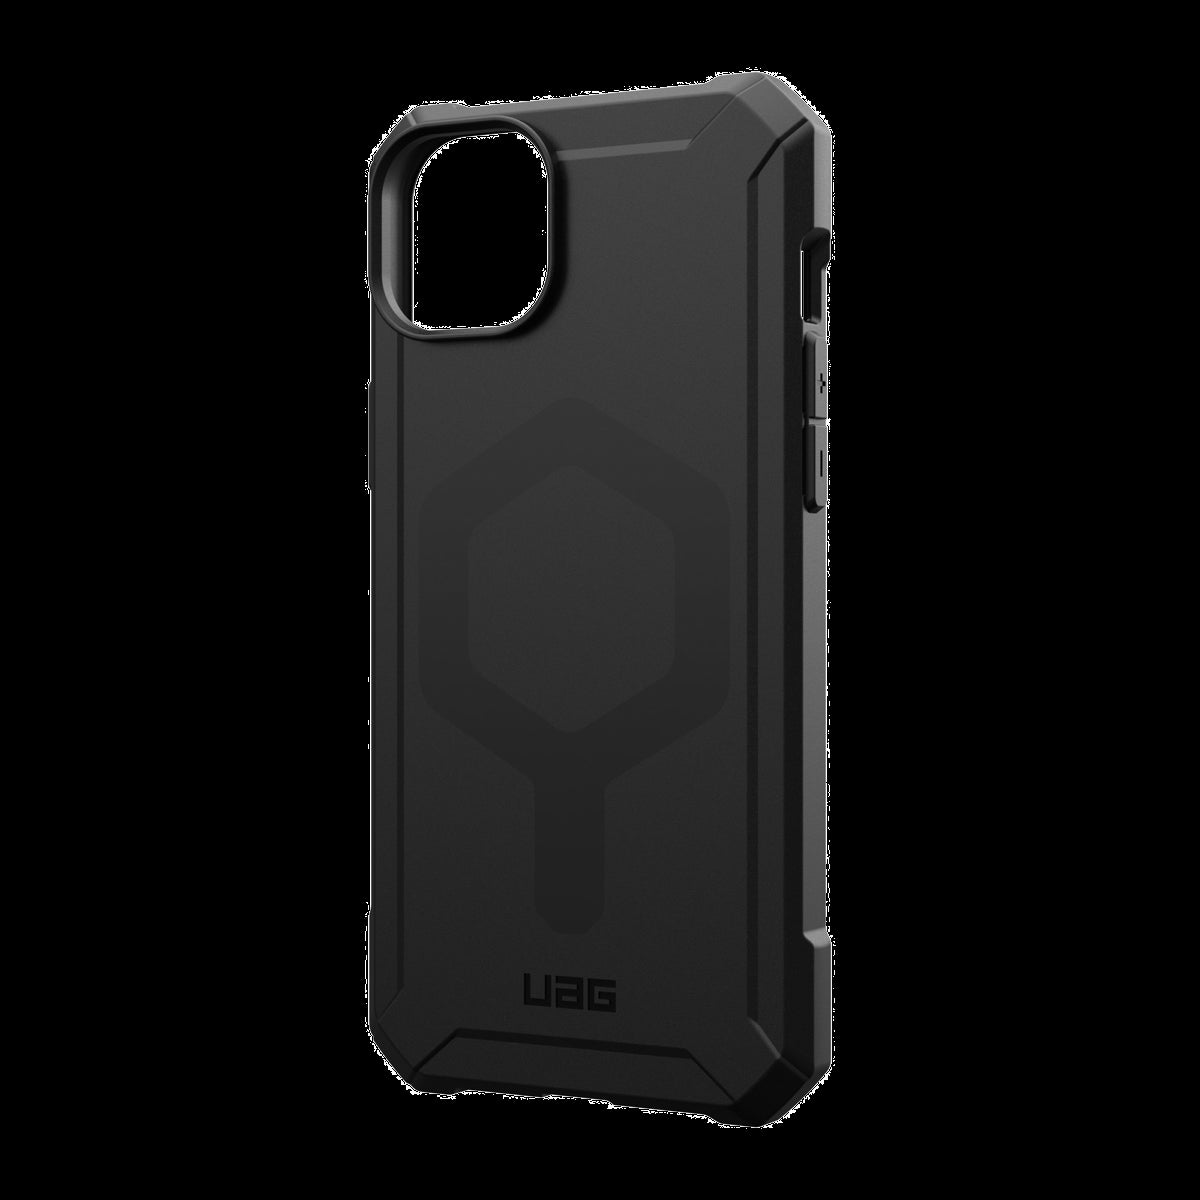 Get uncompromised defense with UAG Essential Armor – a one-piece TPU case featuring an ultra-thin design, 12 ft drop protection and is compatible with MagSafe charging.